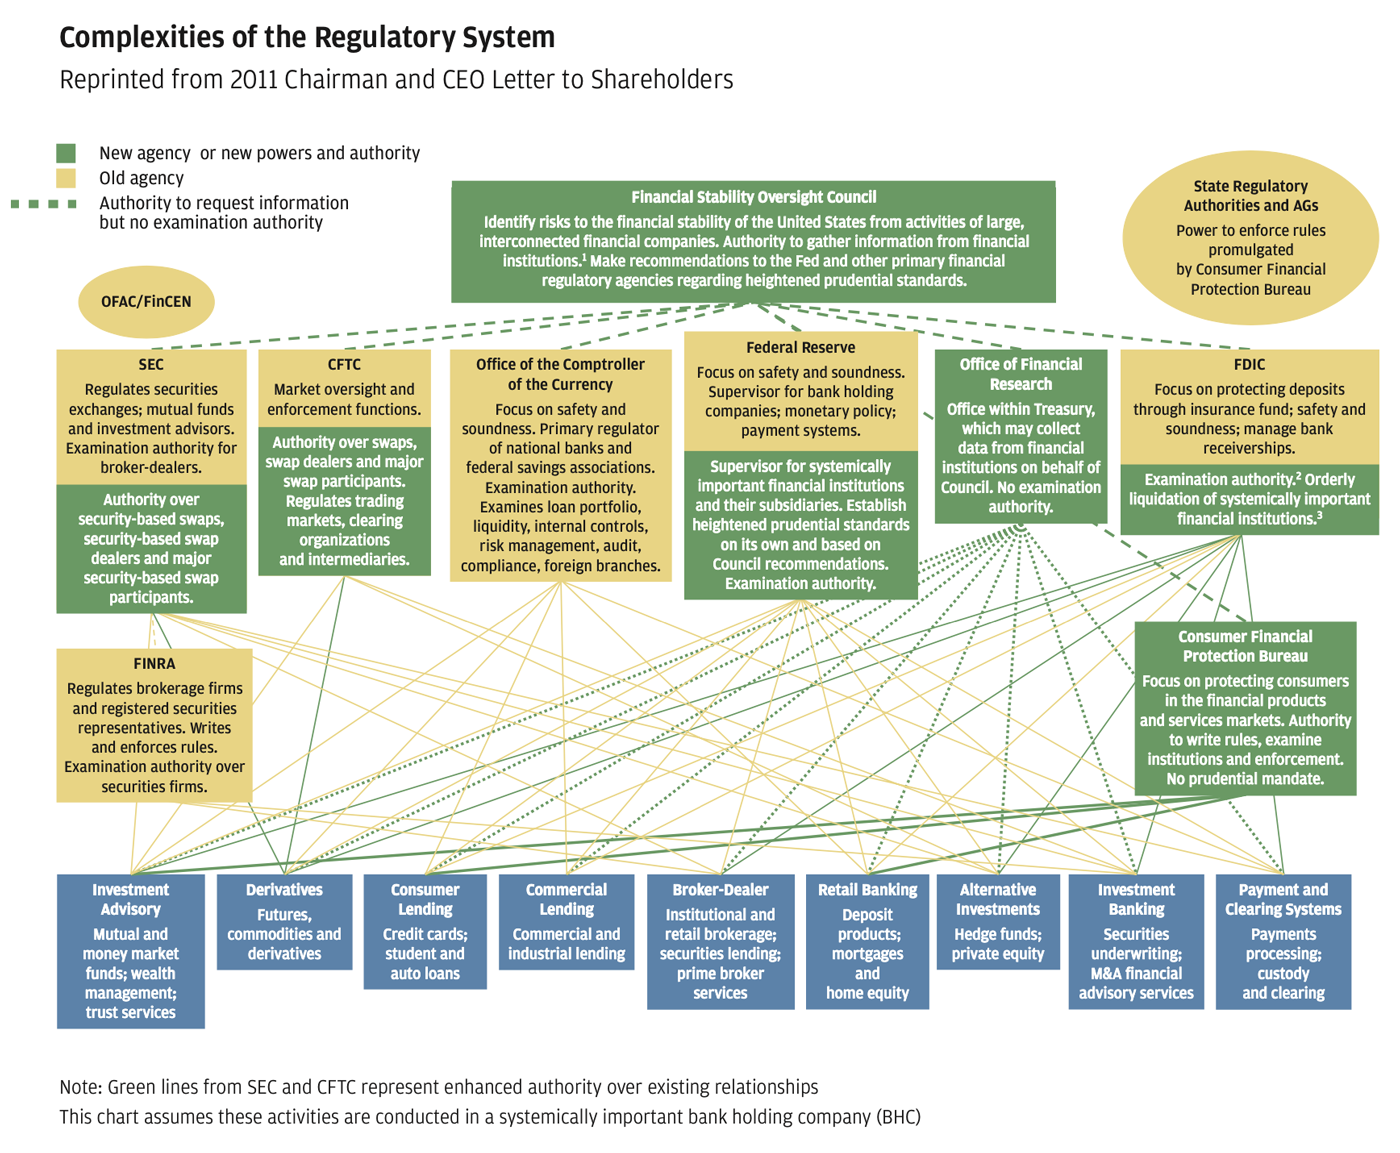 Infographic showing complexity of U.S. regulatory system